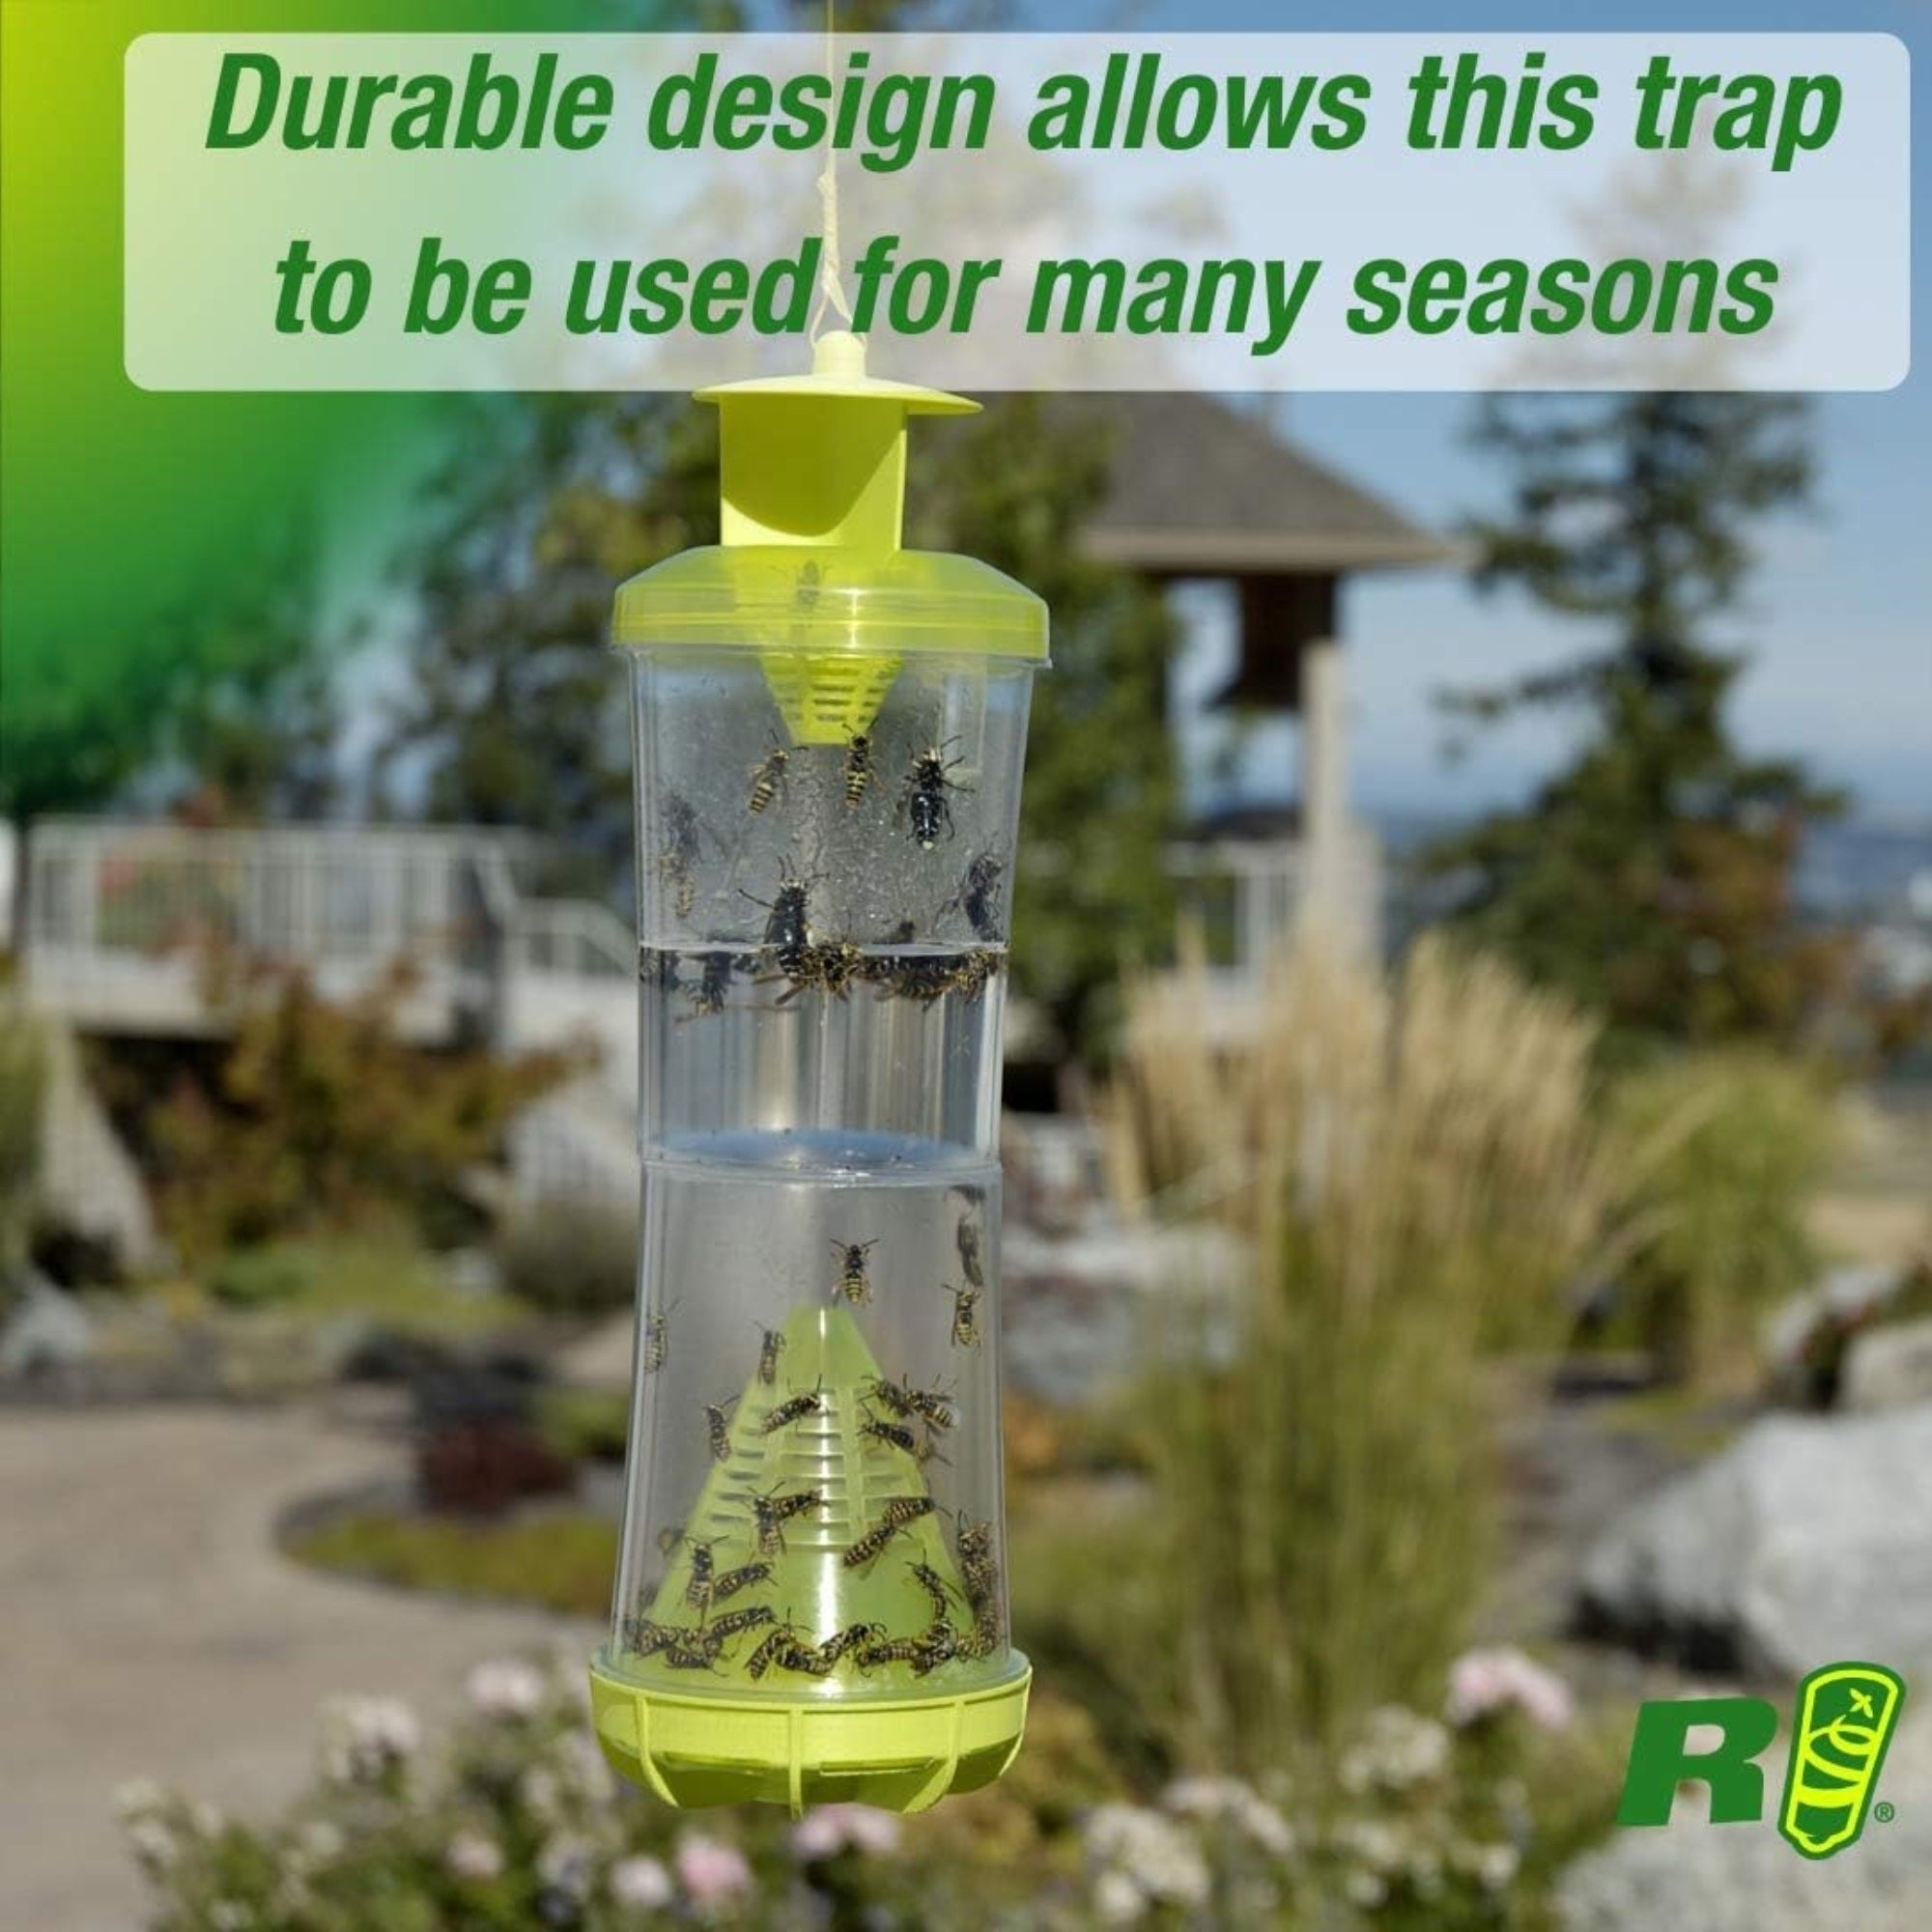 RESCUE! Non-Toxic Wasp, Hornet, Yellowjacket Trap (WHY Trap) Attractant Refill - 2 Week Refill